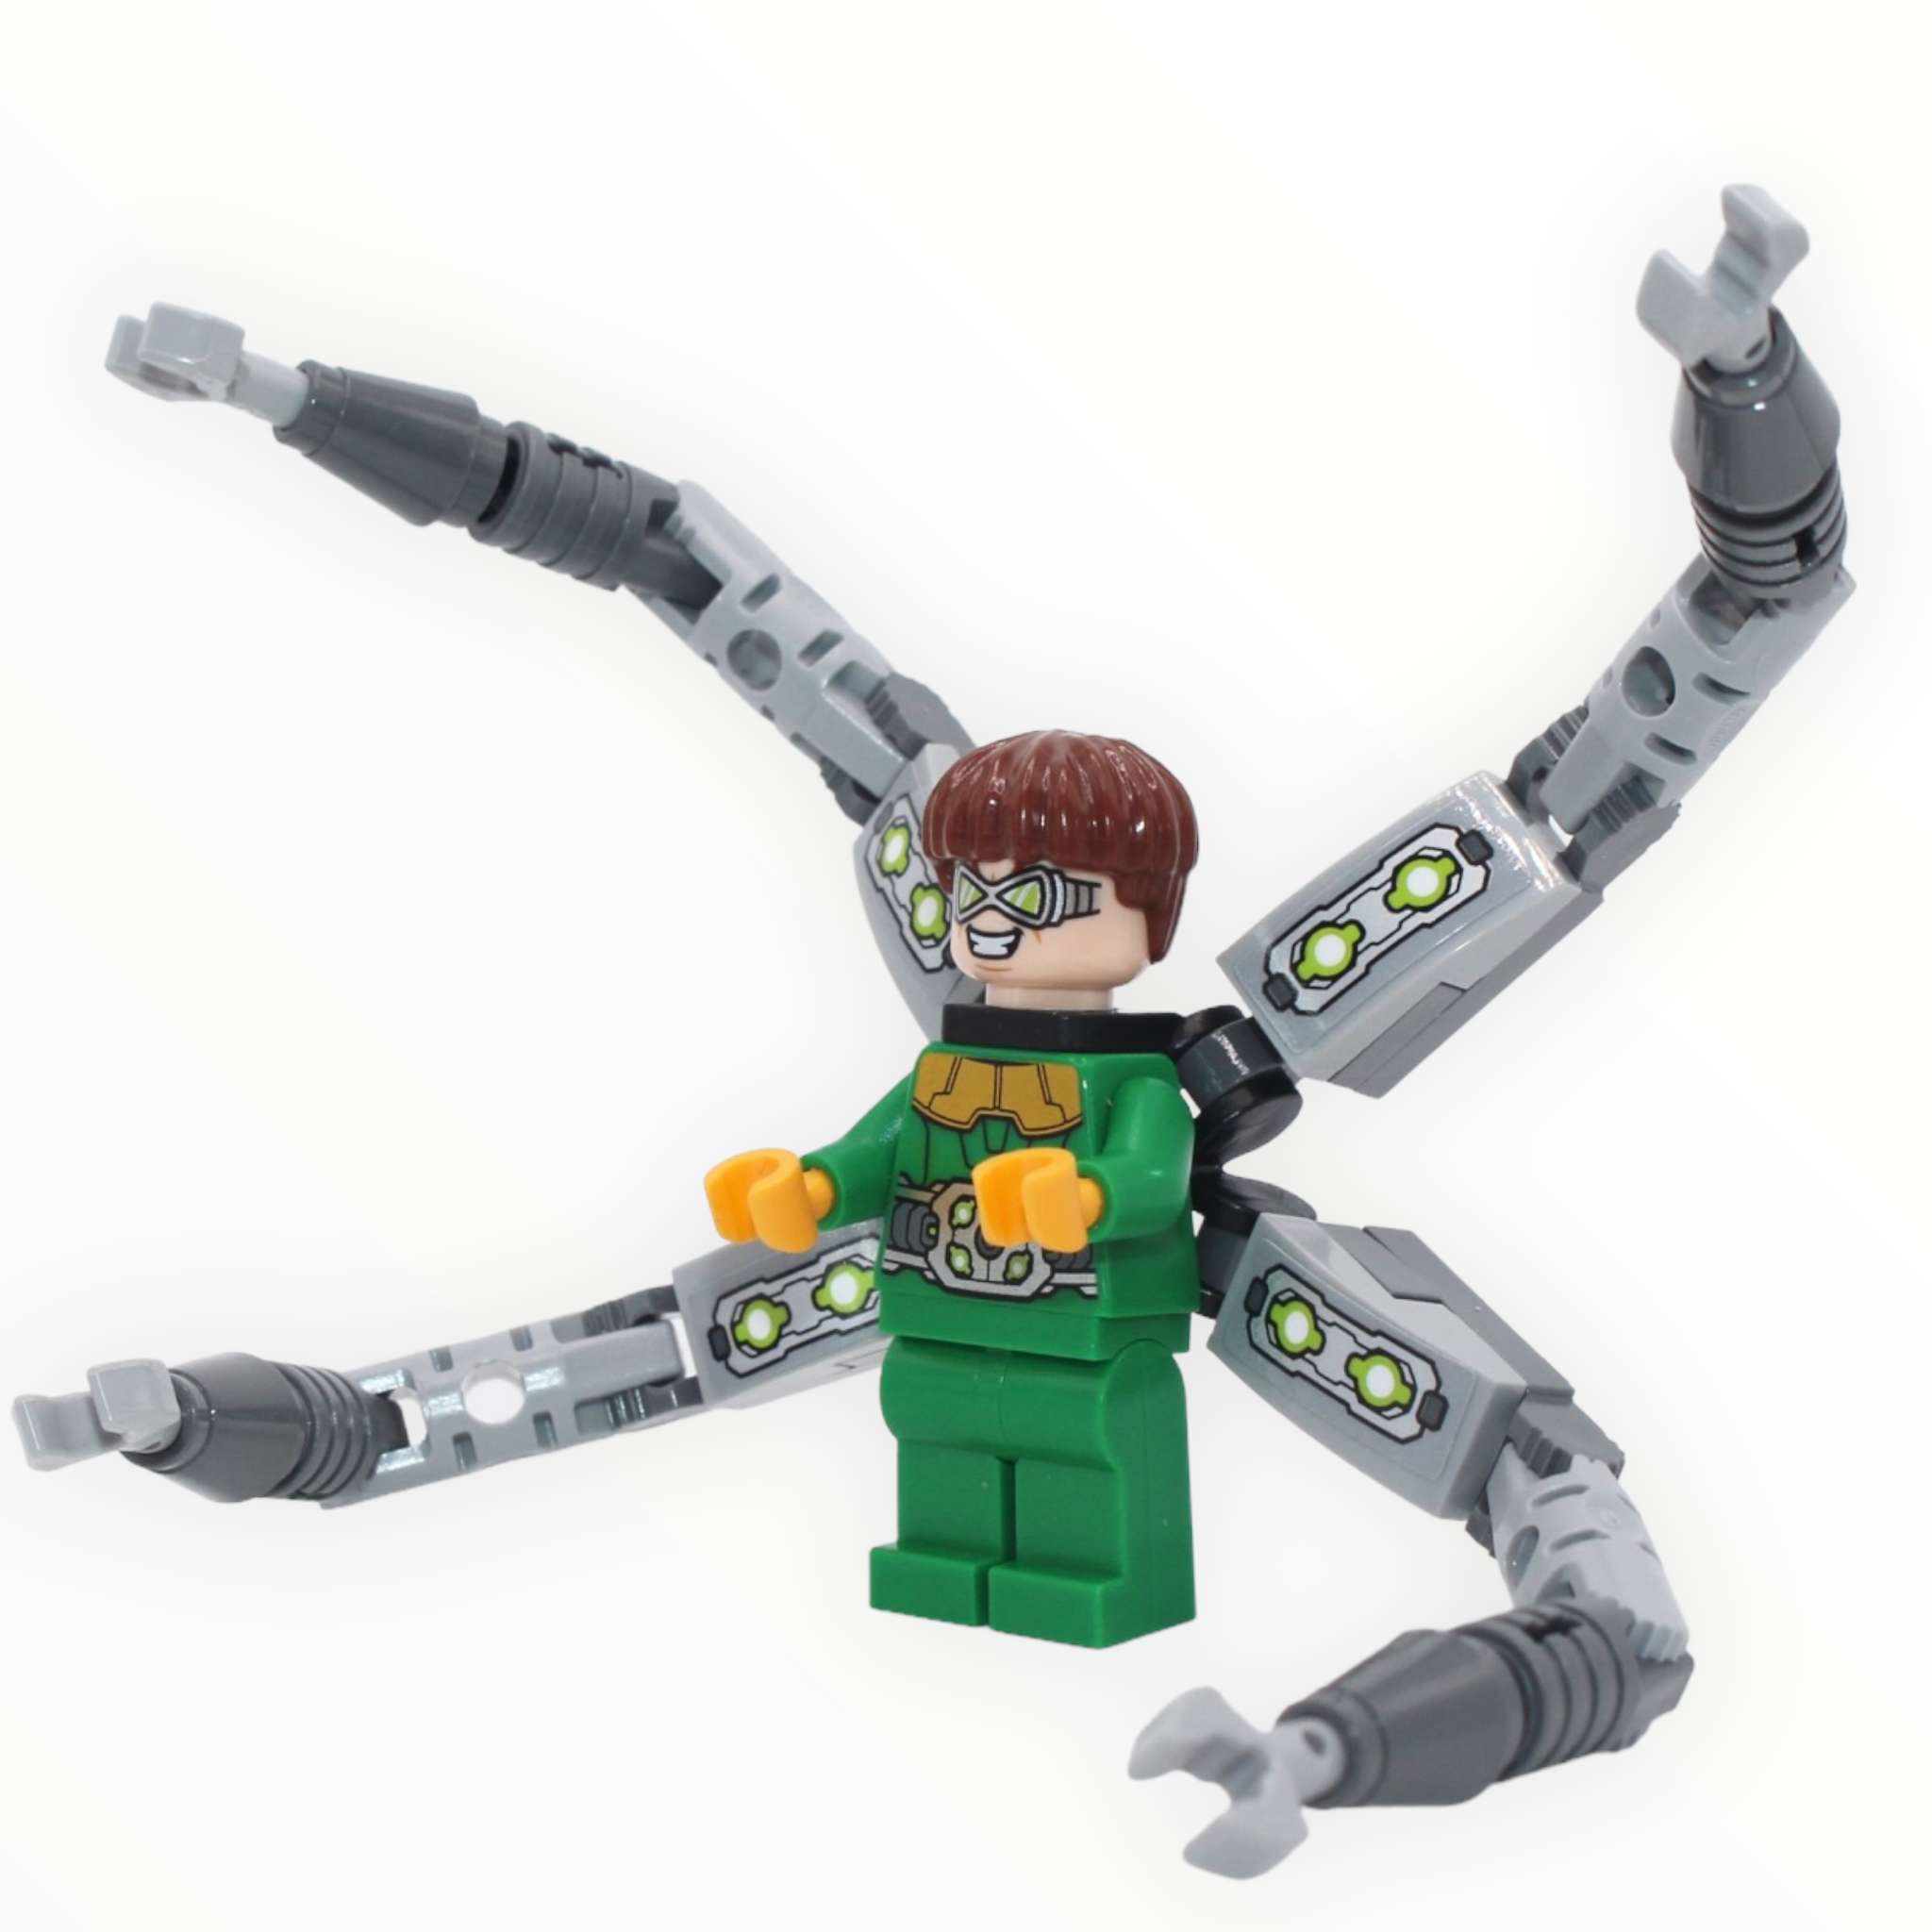 Dr. Octopus/ Doc Ock (green outfit, arms with stickers)